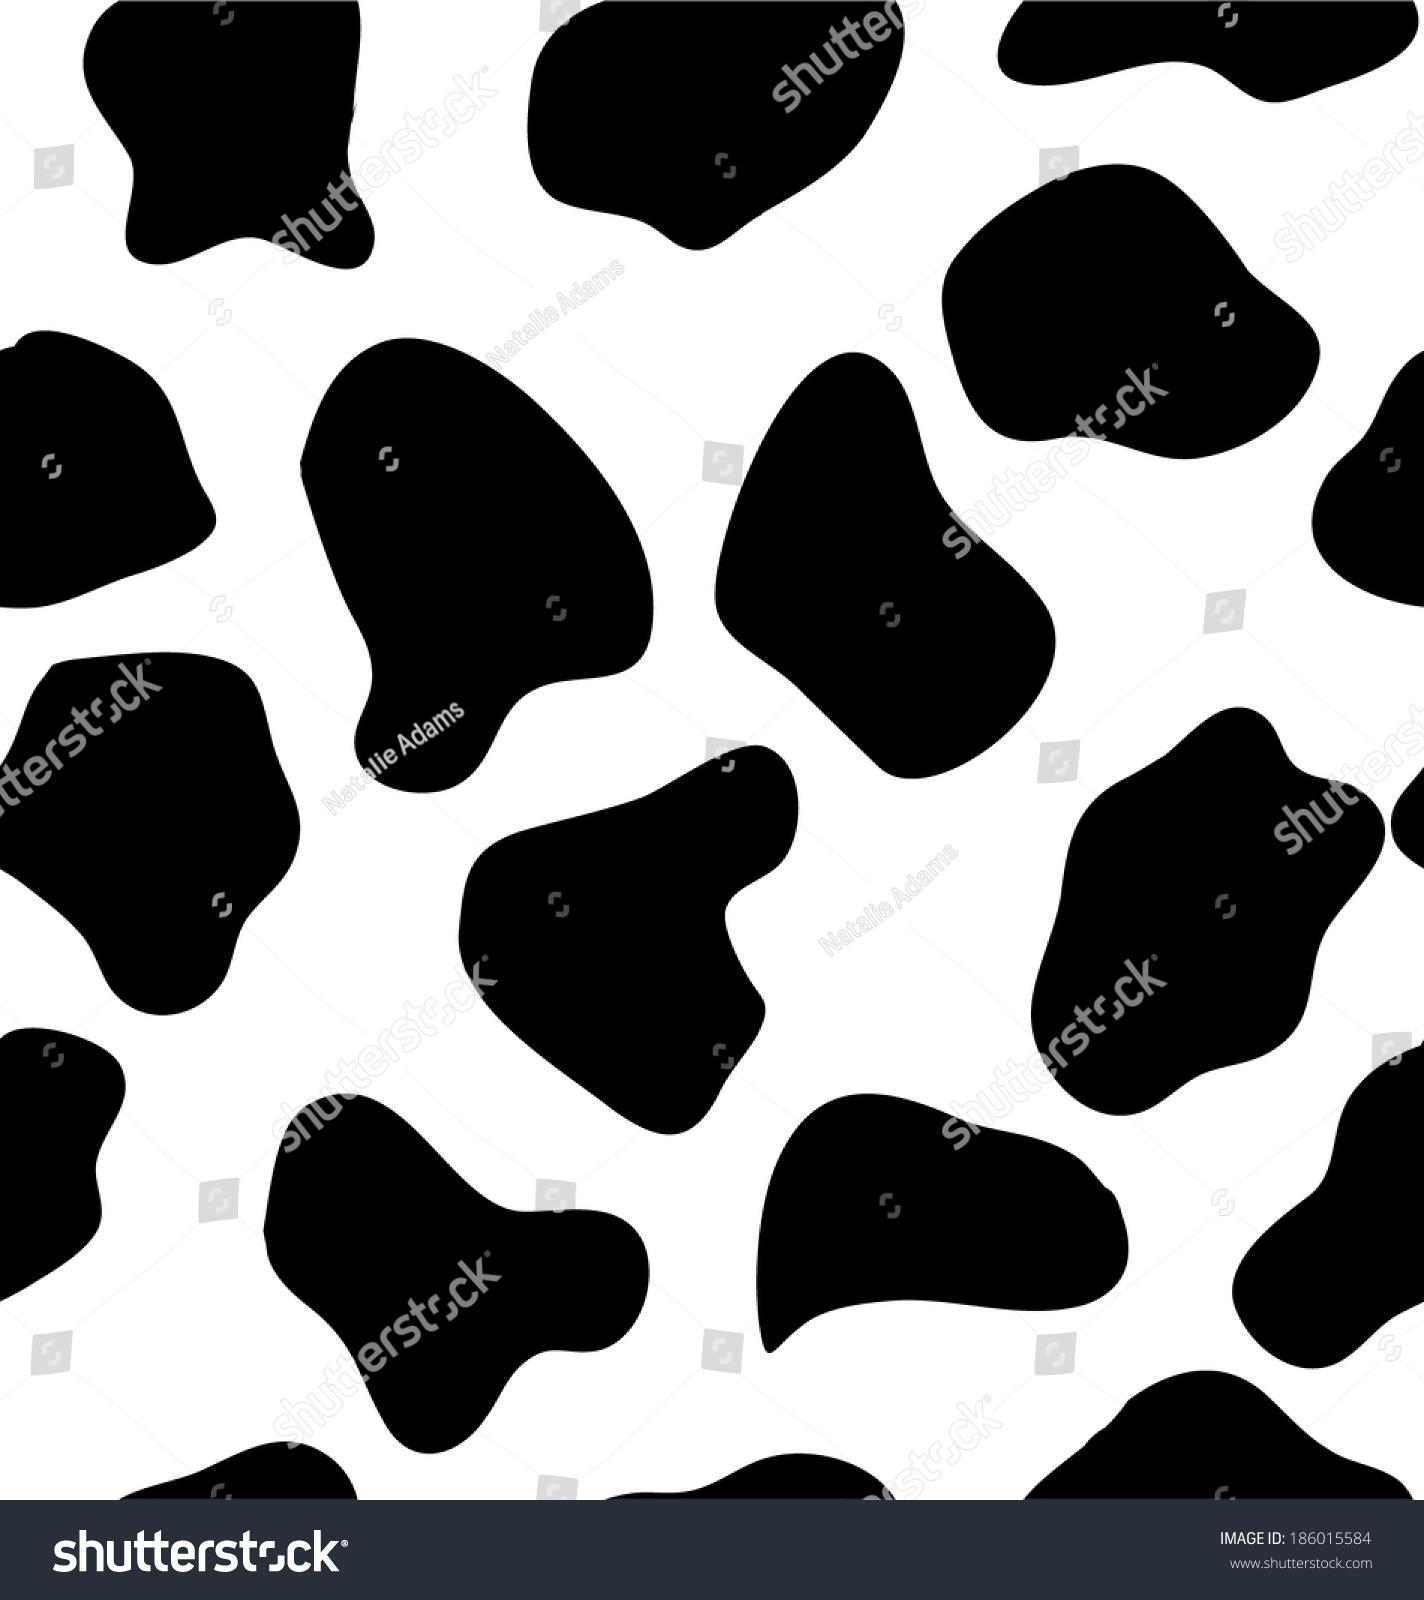 cow pattern clipart - photo #24